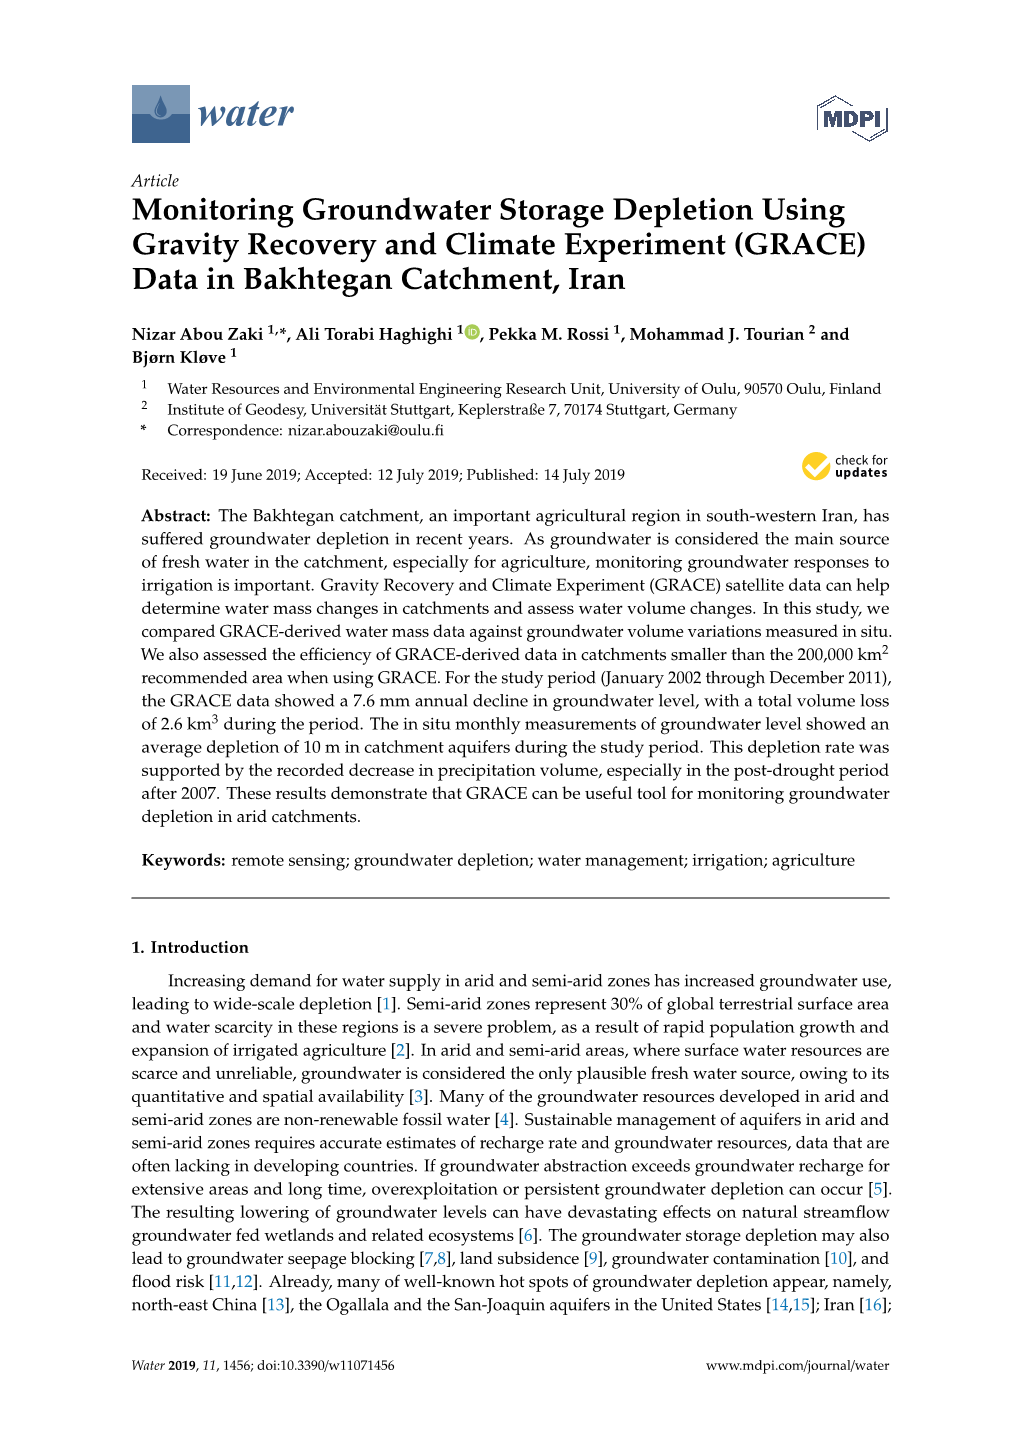 Monitoring Groundwater Storage Depletion Using Gravity Recovery and Climate Experiment (GRACE) Data in Bakhtegan Catchment, Iran